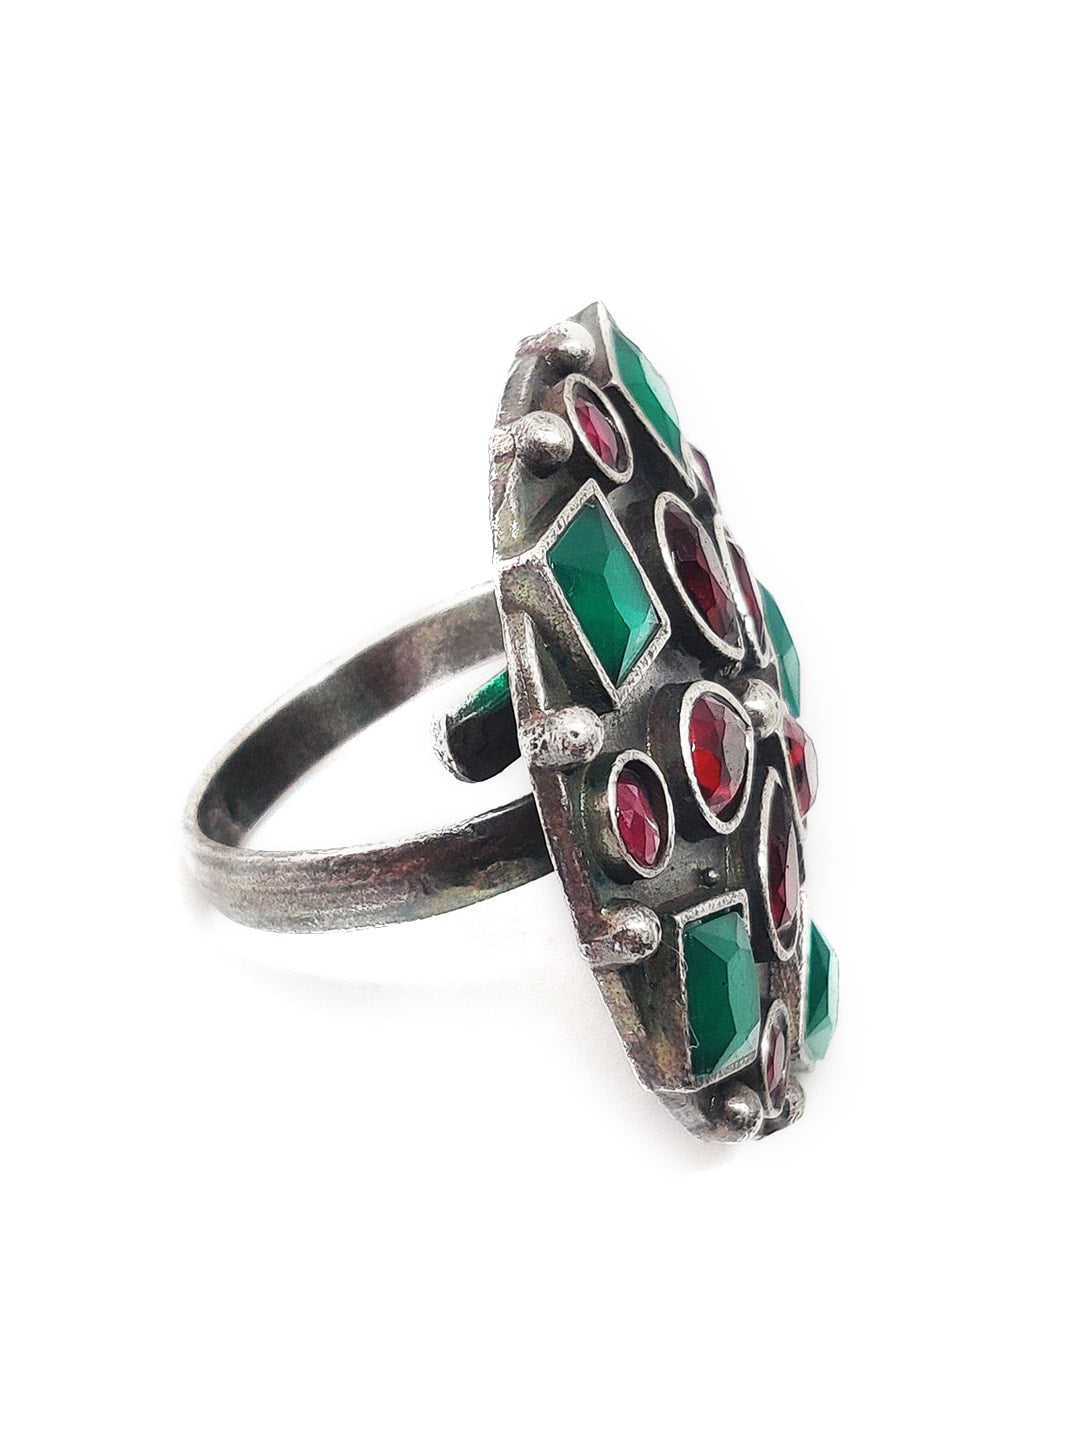 EL REGALO Women German Silver Red & Green Stone-Studded Oxidised Finger Ring - for Women and Girls
Style ID: 16843722